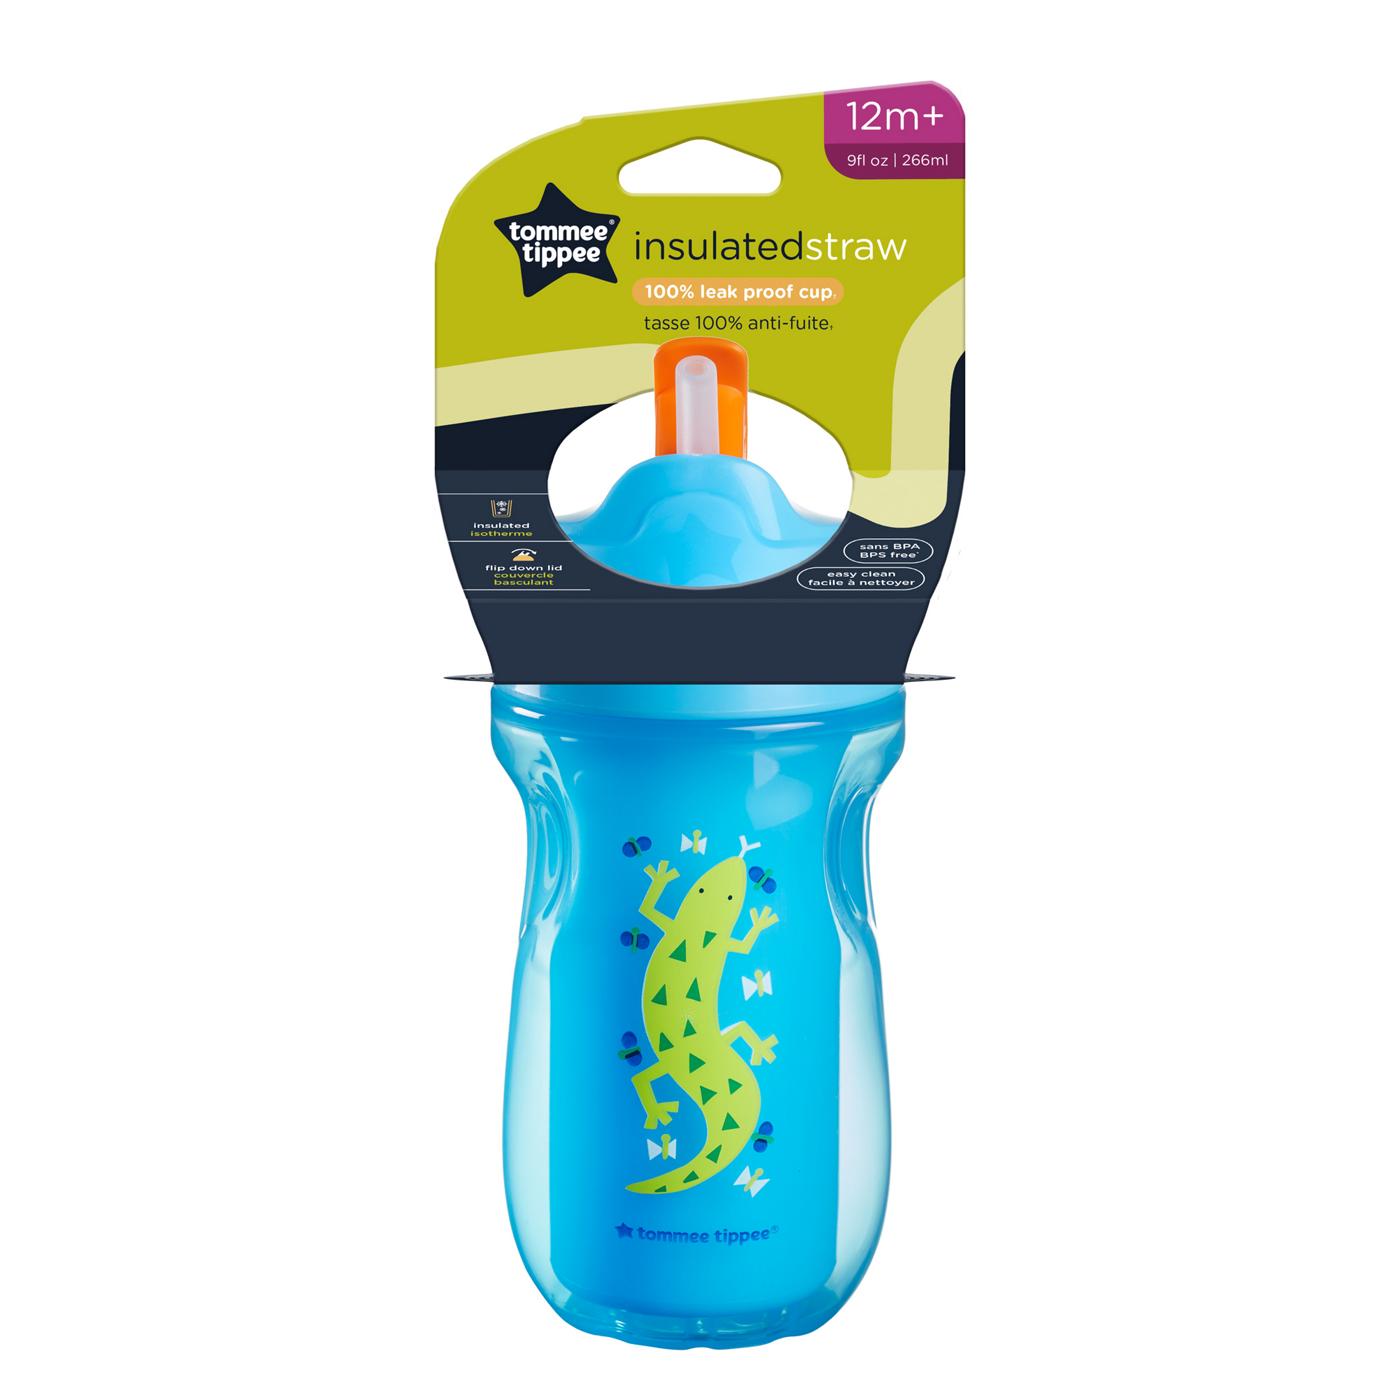 Tommee Tippee Insulated Straw Cup - Assorted Colors; image 1 of 4